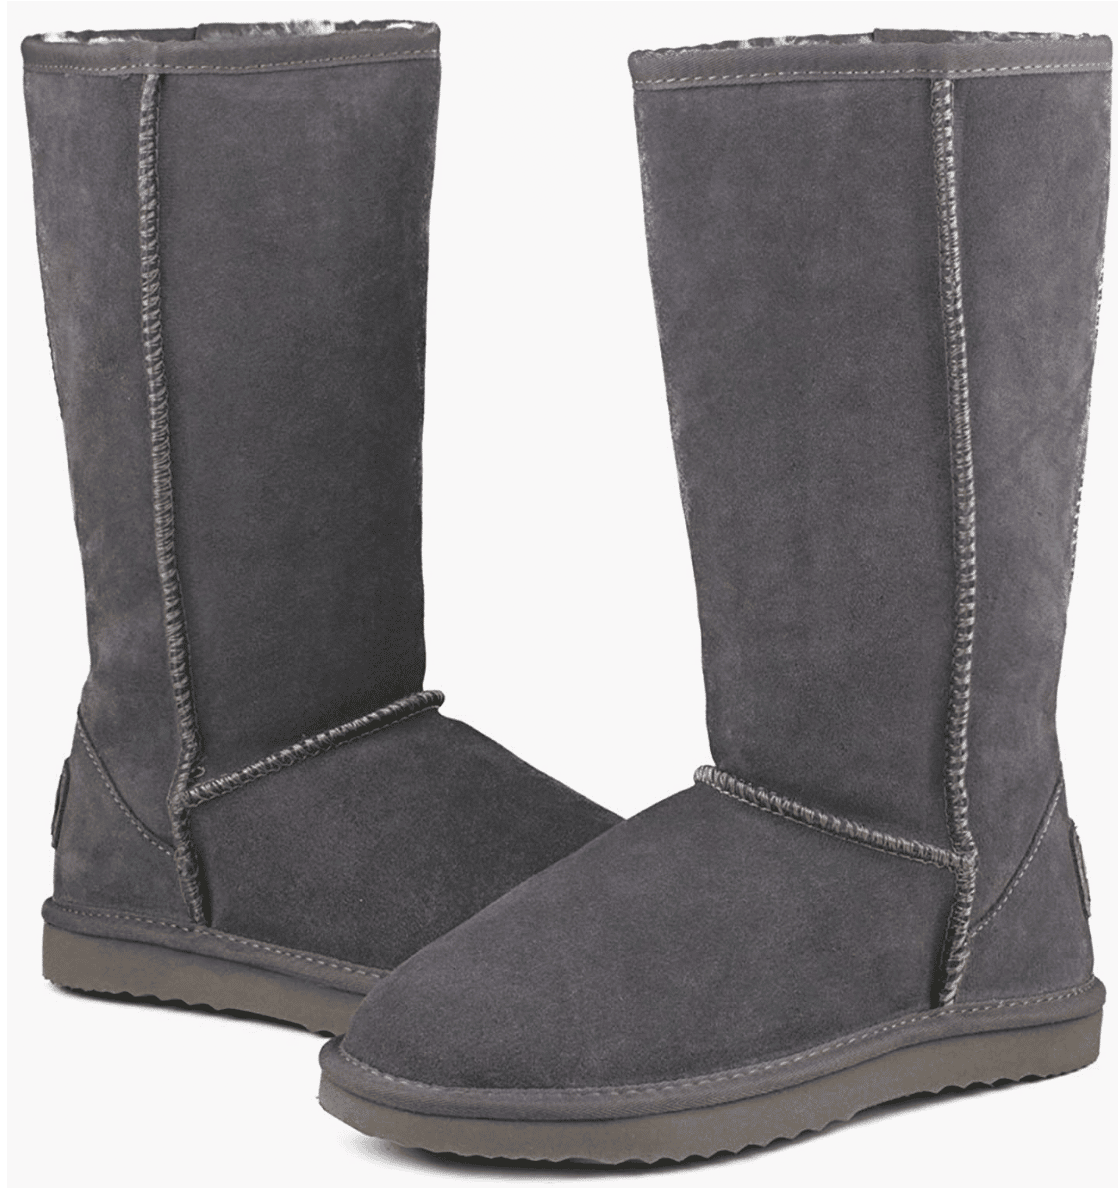 AUSLAND Women's Classic Leather Tall Snow Boot